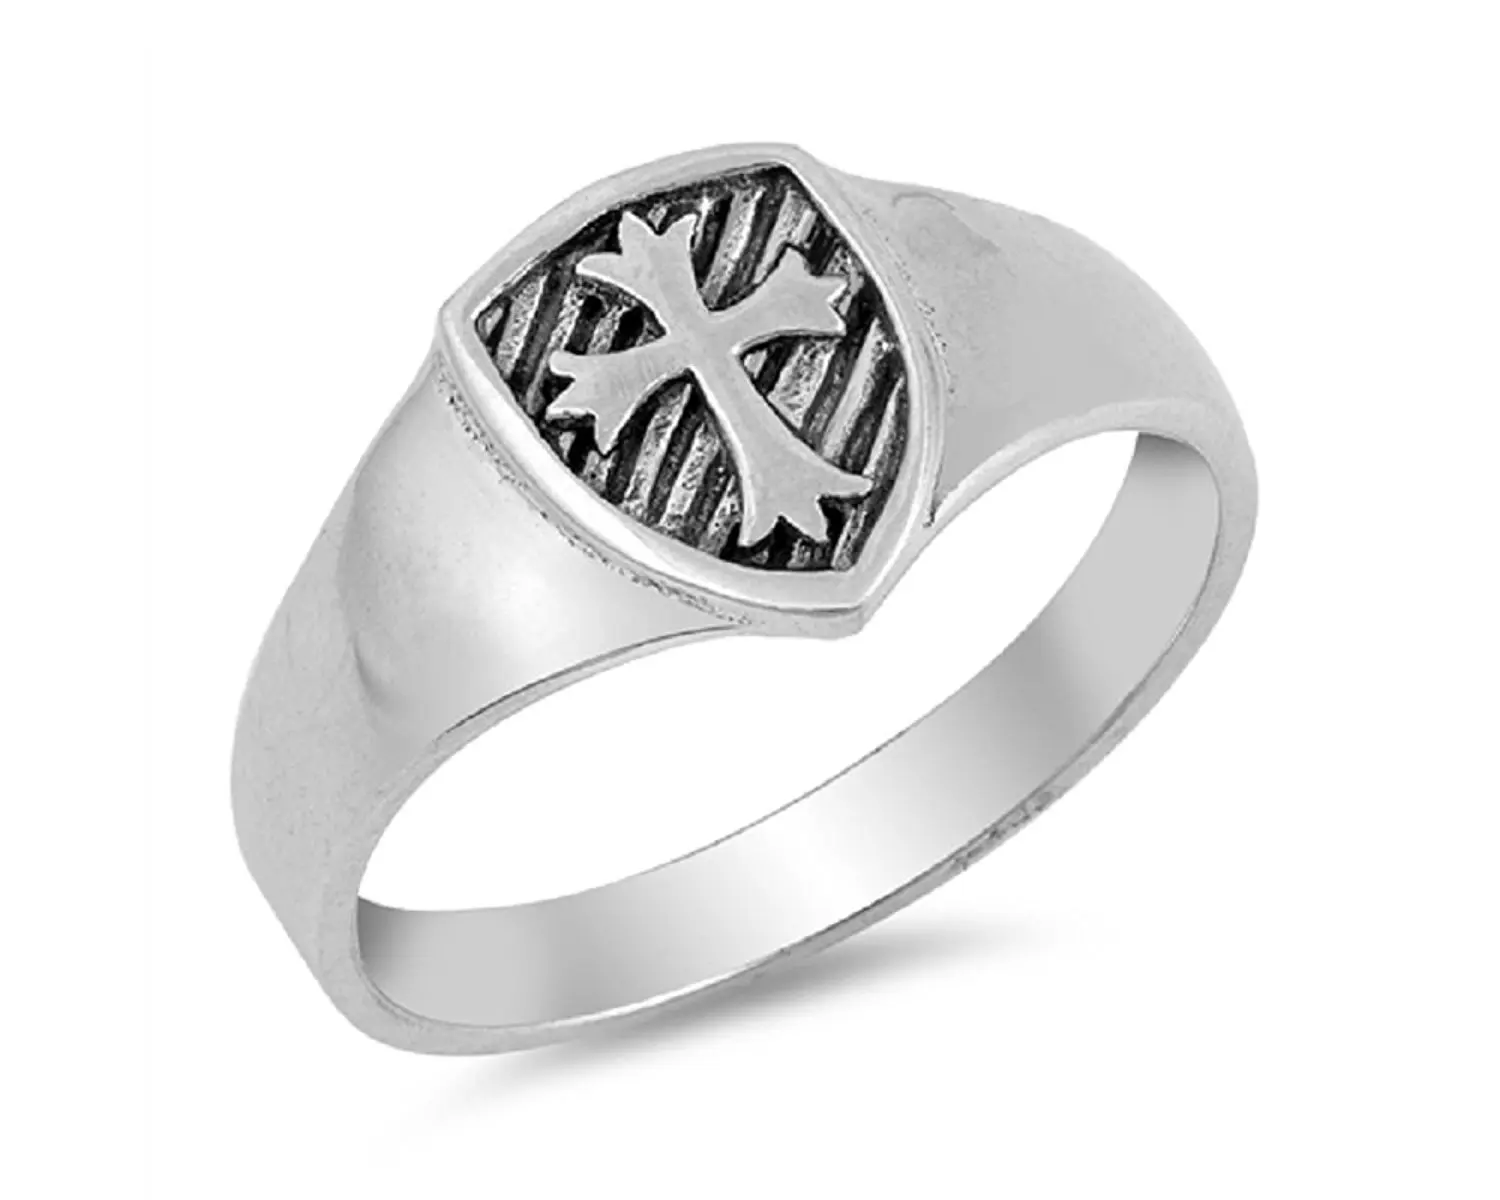 CloseoutWarehouse High Polished Sterling Silver Ingraved Cross Plain Band Ring